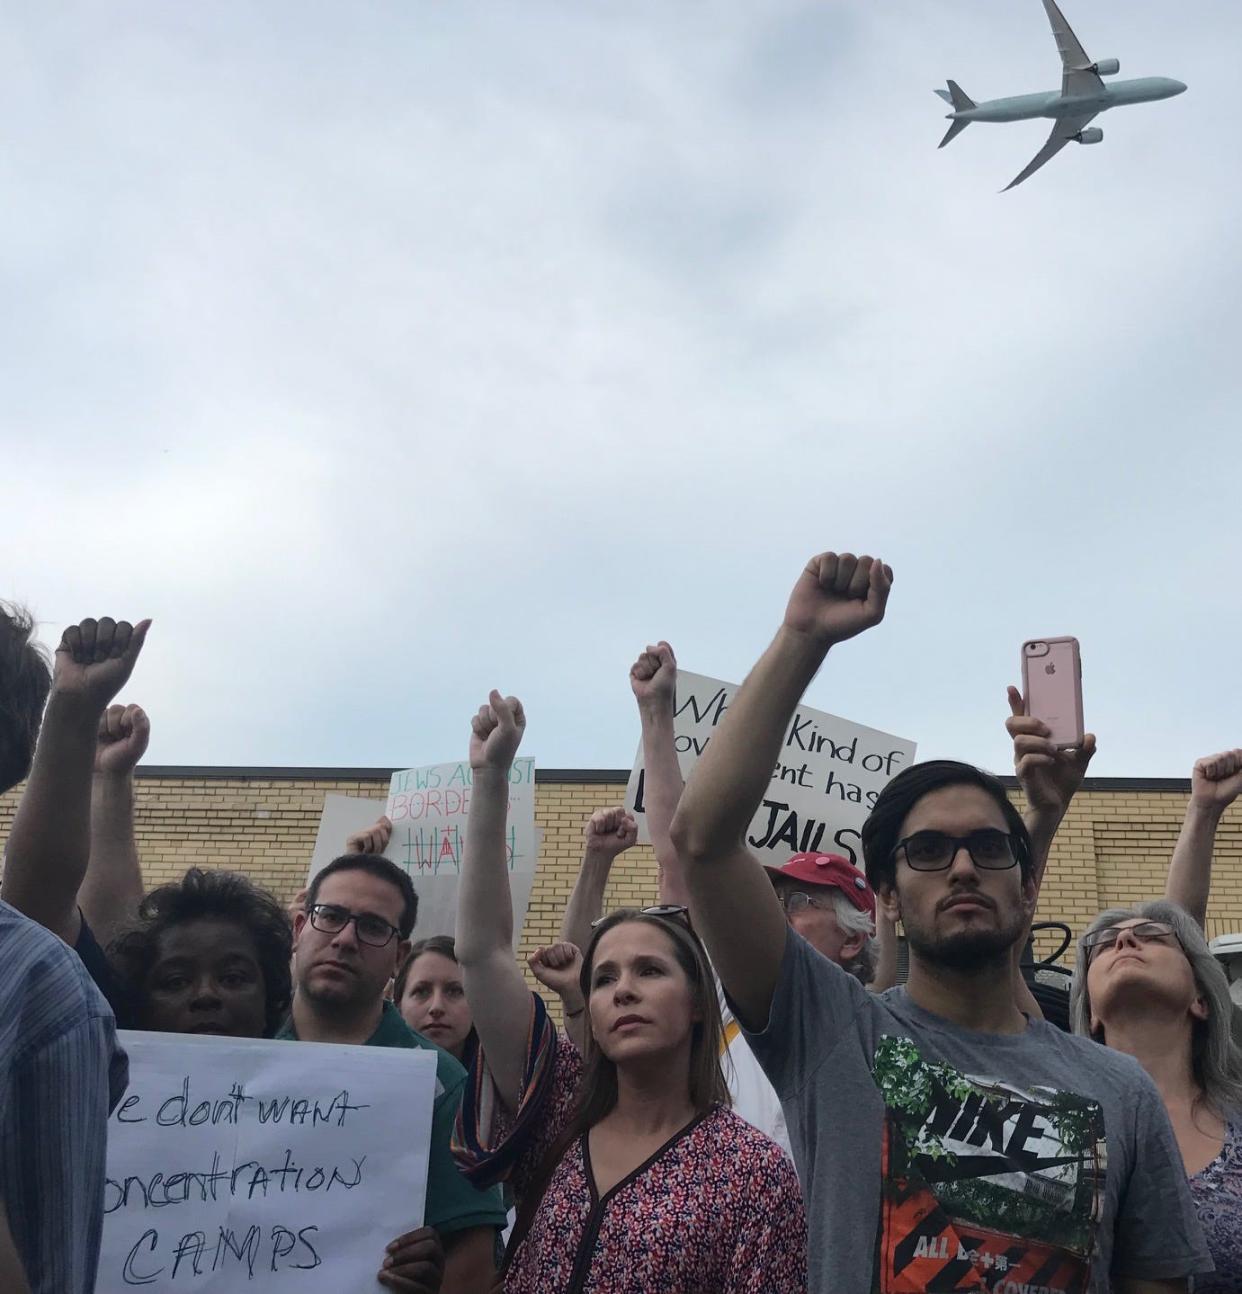 Demonstrators gathered outside the Elizabeth immigration detention center on July 2, 2019 as part of nationwide protest. New Jersey has appealed a court ruling allowing the facility to stay open.